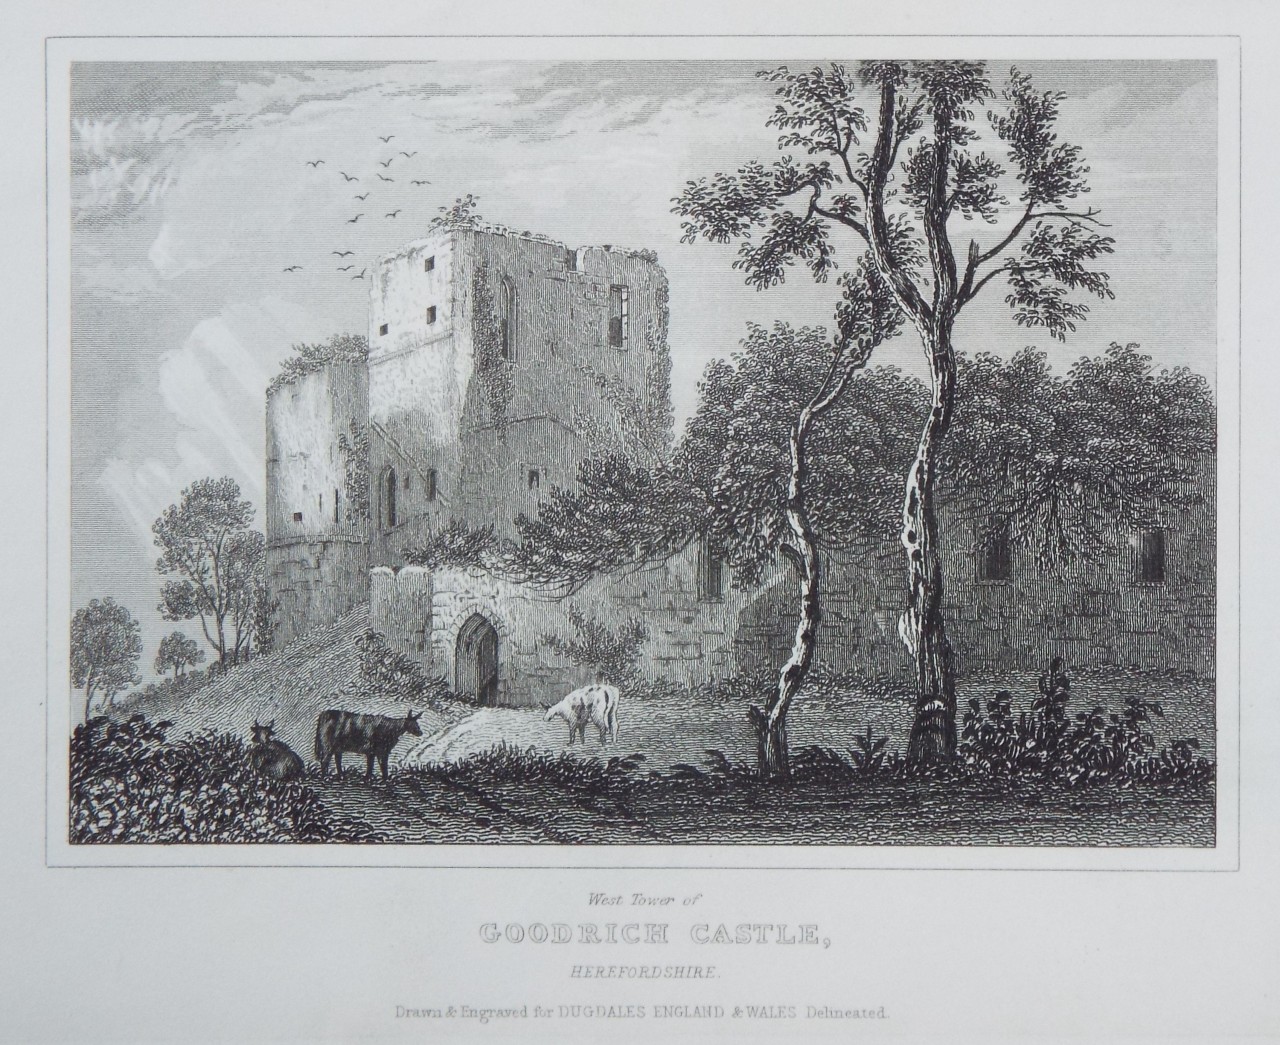 Print - West Tower of Goodrich Castle, Herefordshire.